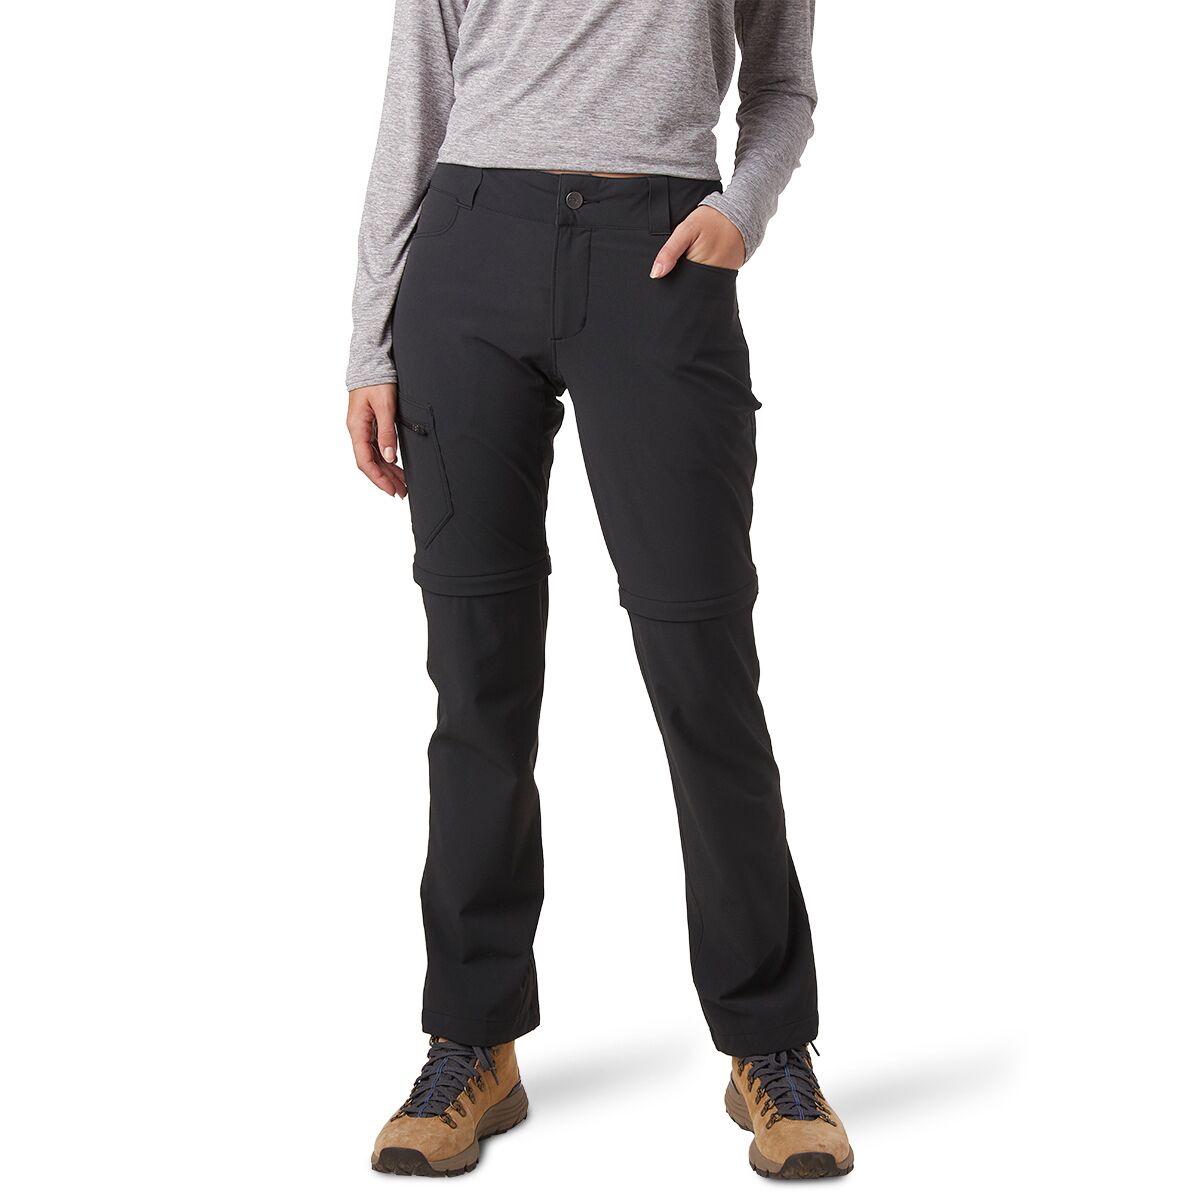 Outdoor Research Ferrosi Convertible Pant - Women's | Backcountry.com